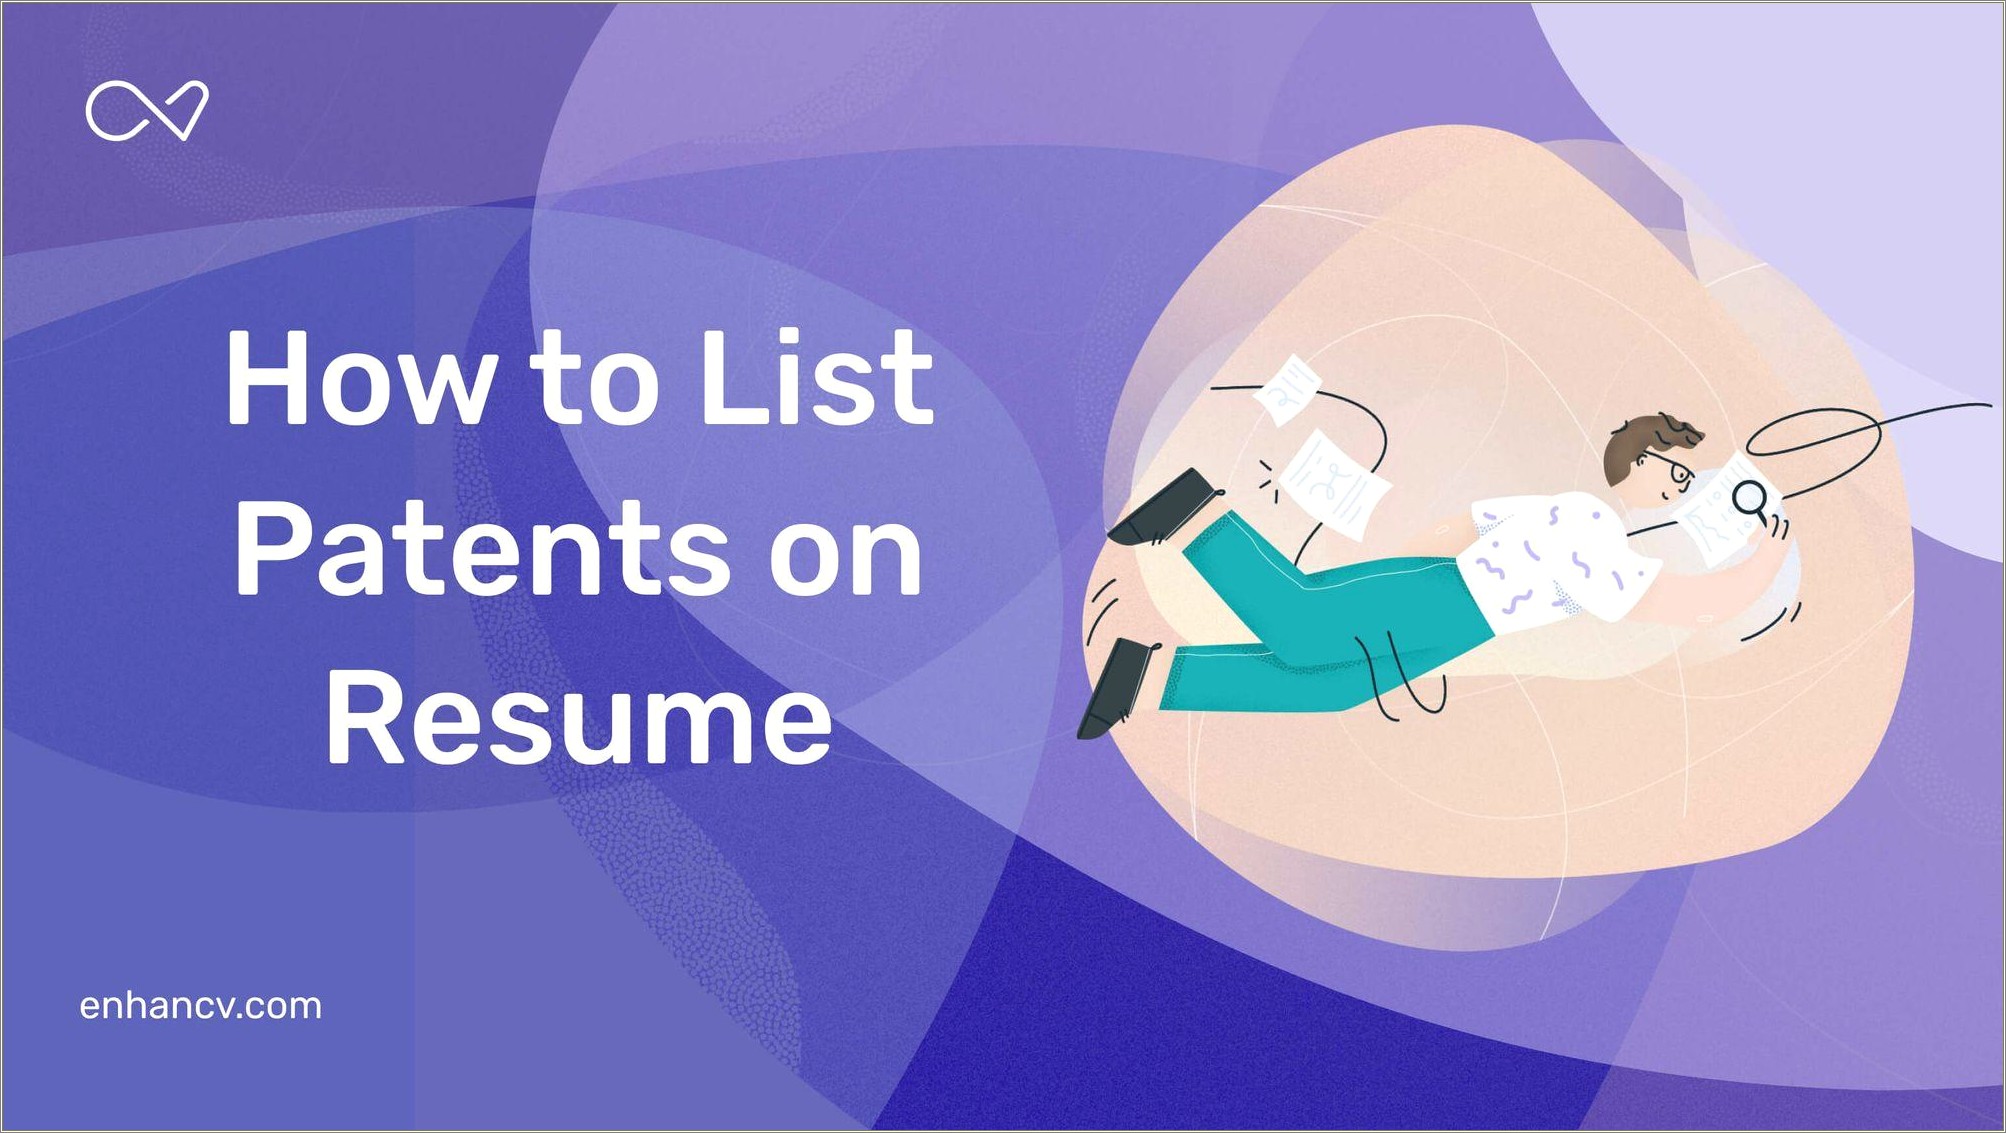 Where To Put A Patent On Resume